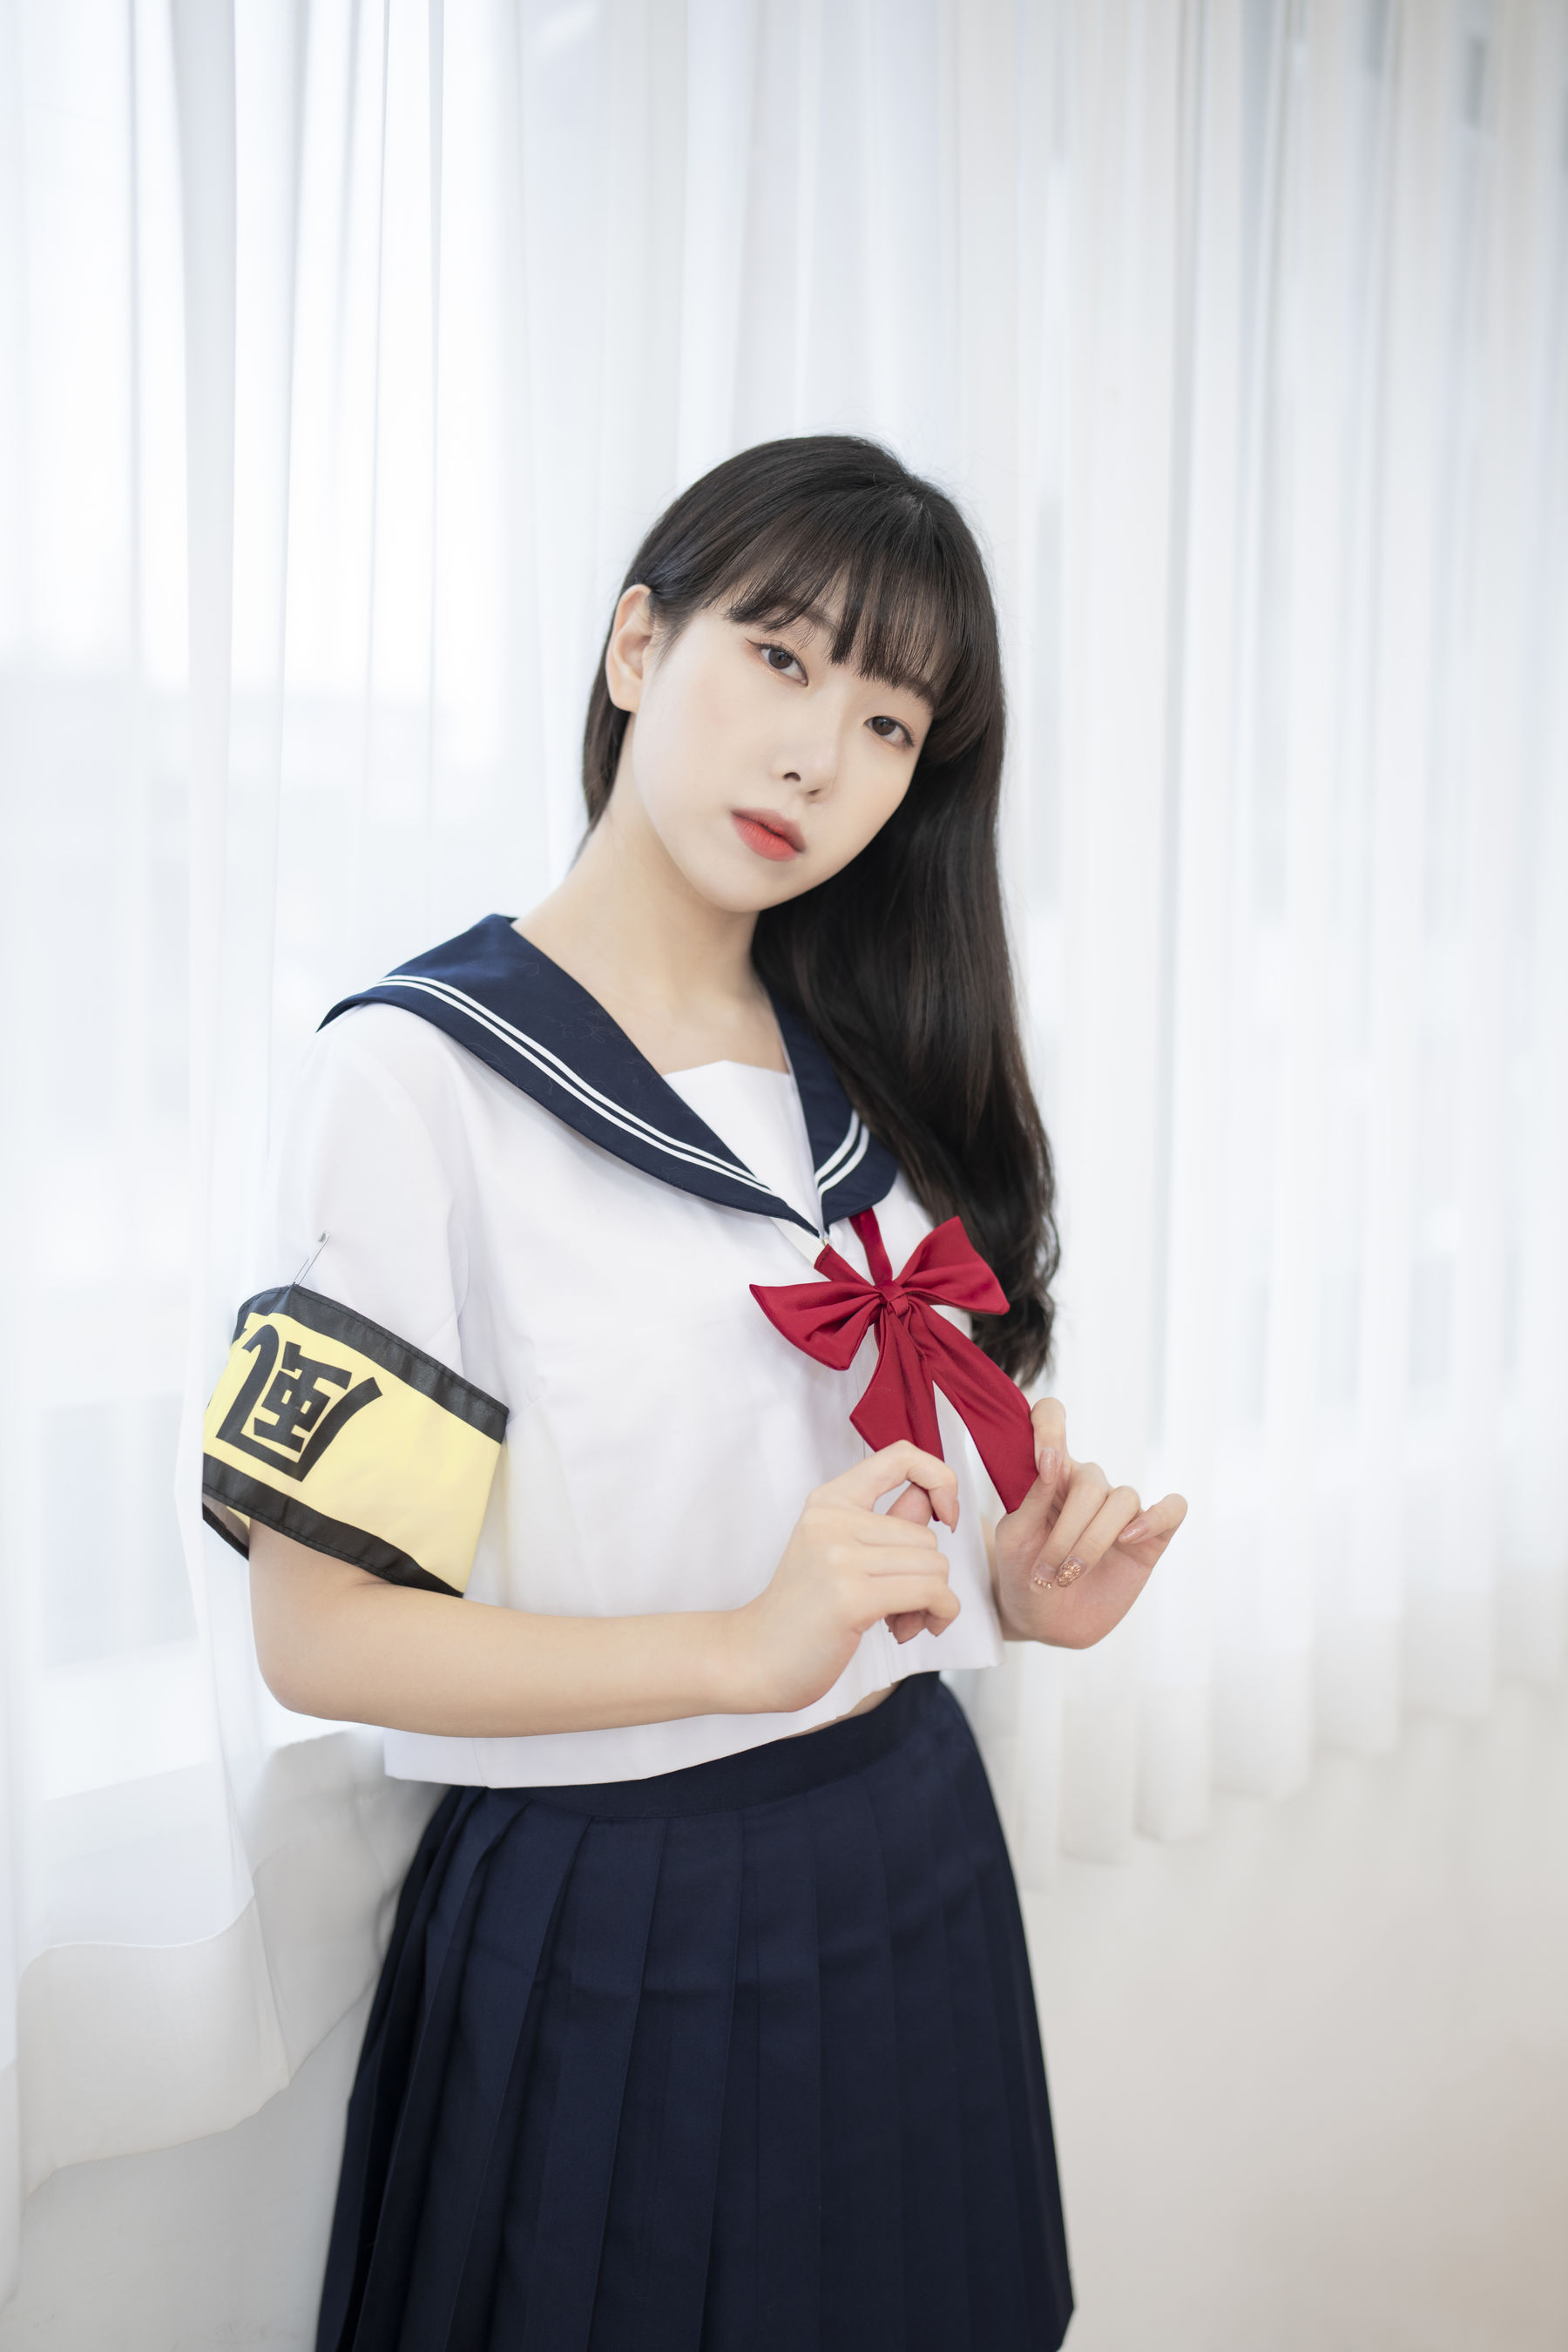 [SIDAM]  Shaany - Student Council 第9张